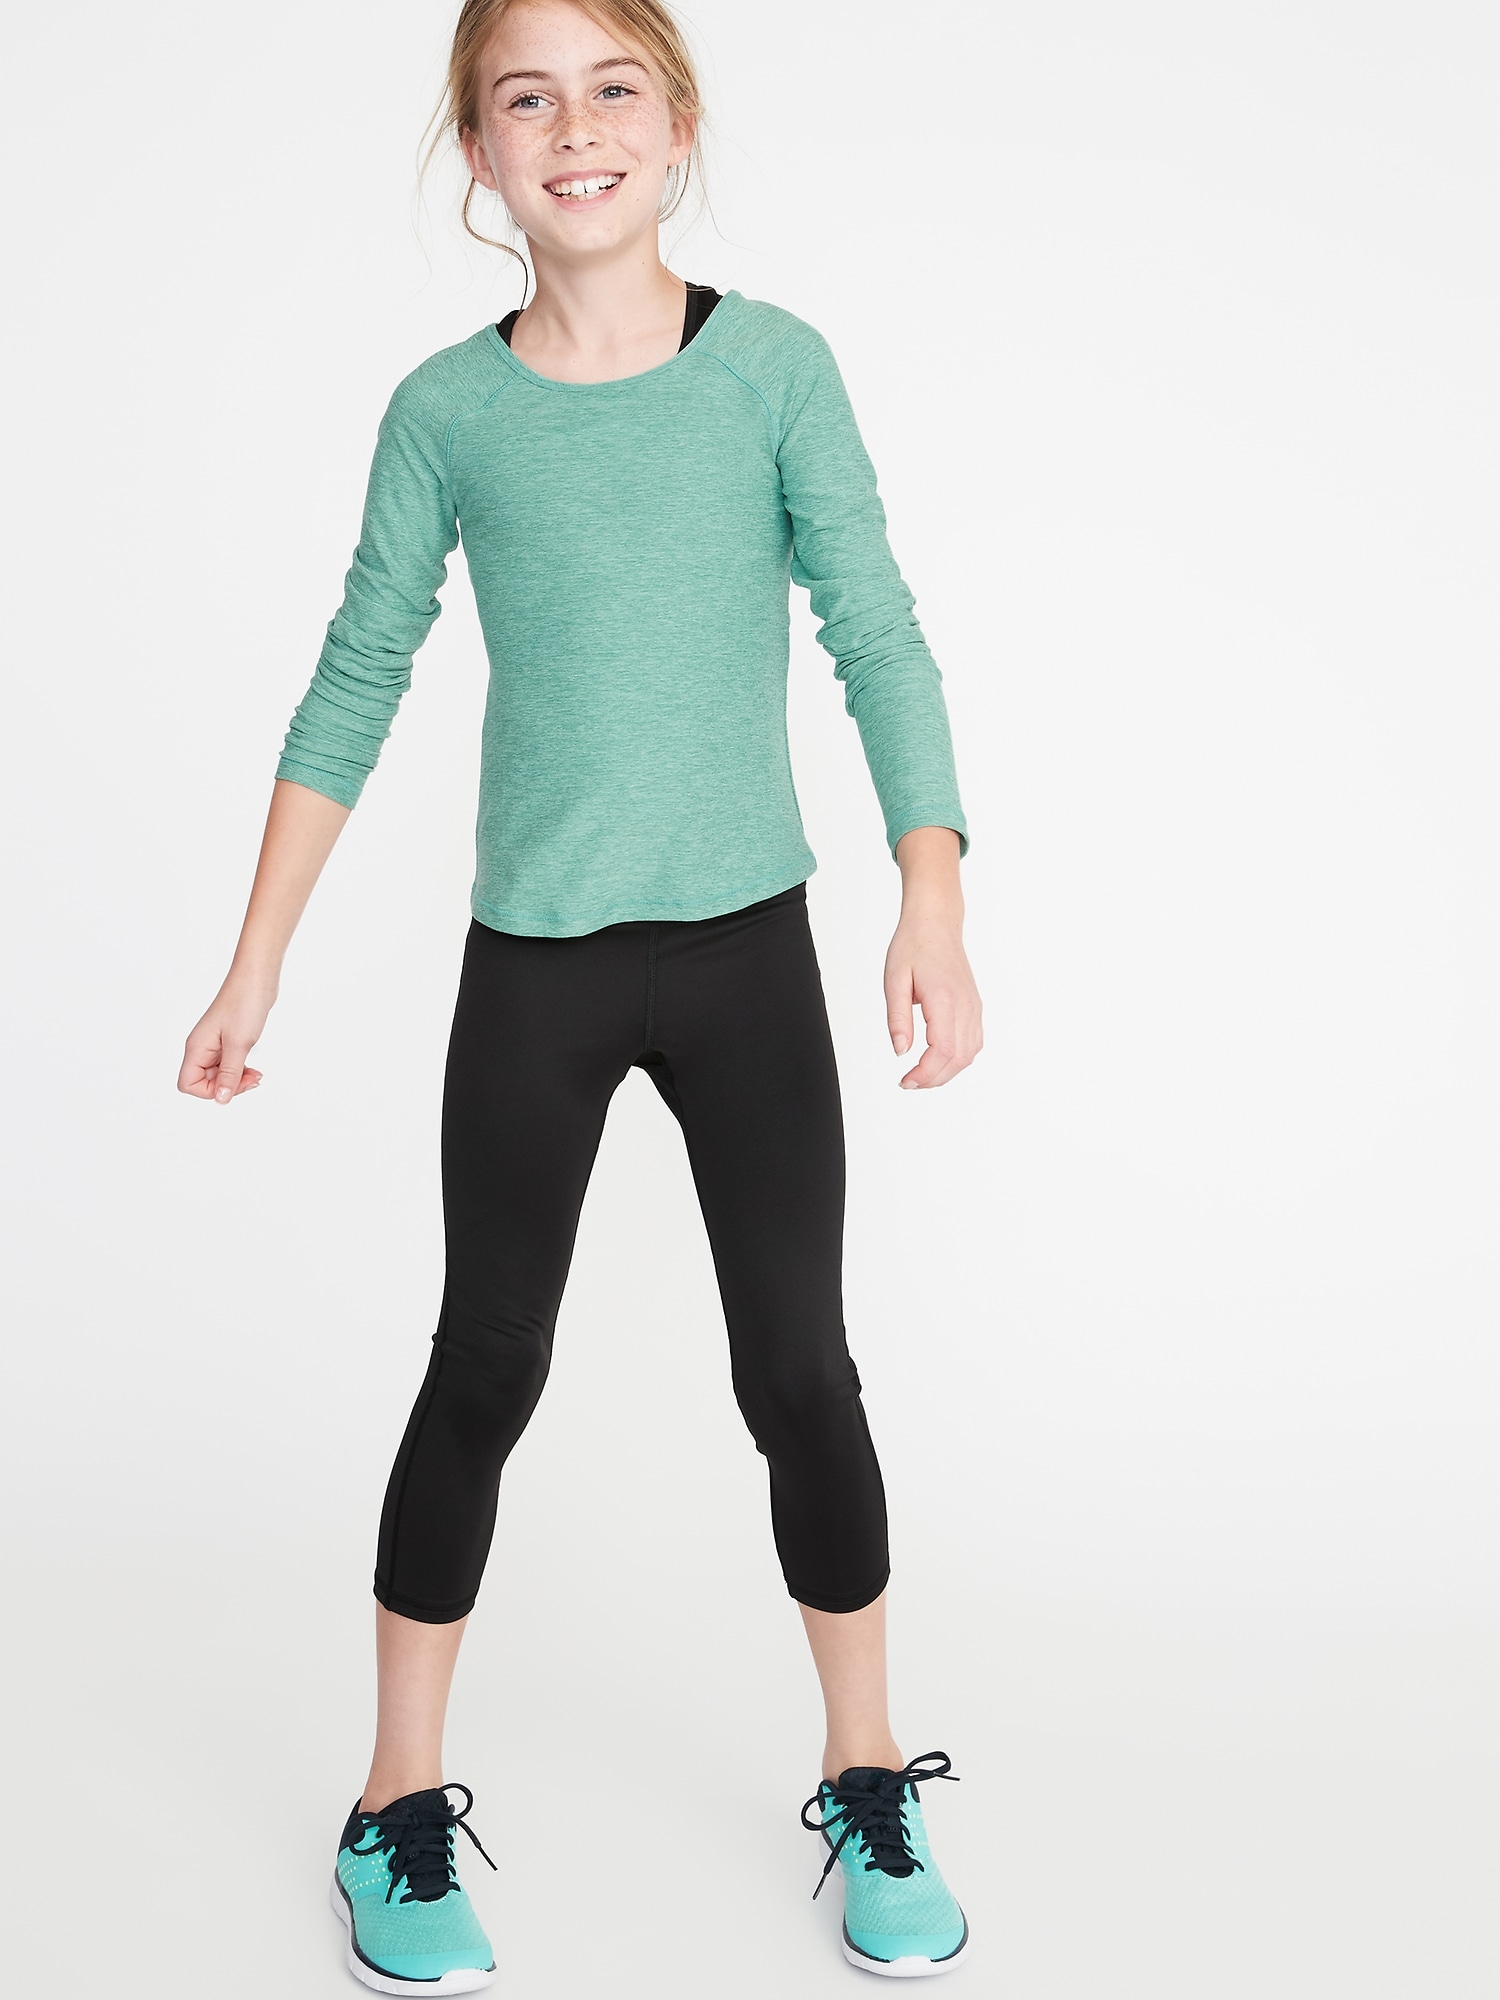 Athletic Leggings Capris By Old Navy Size: Petite Small